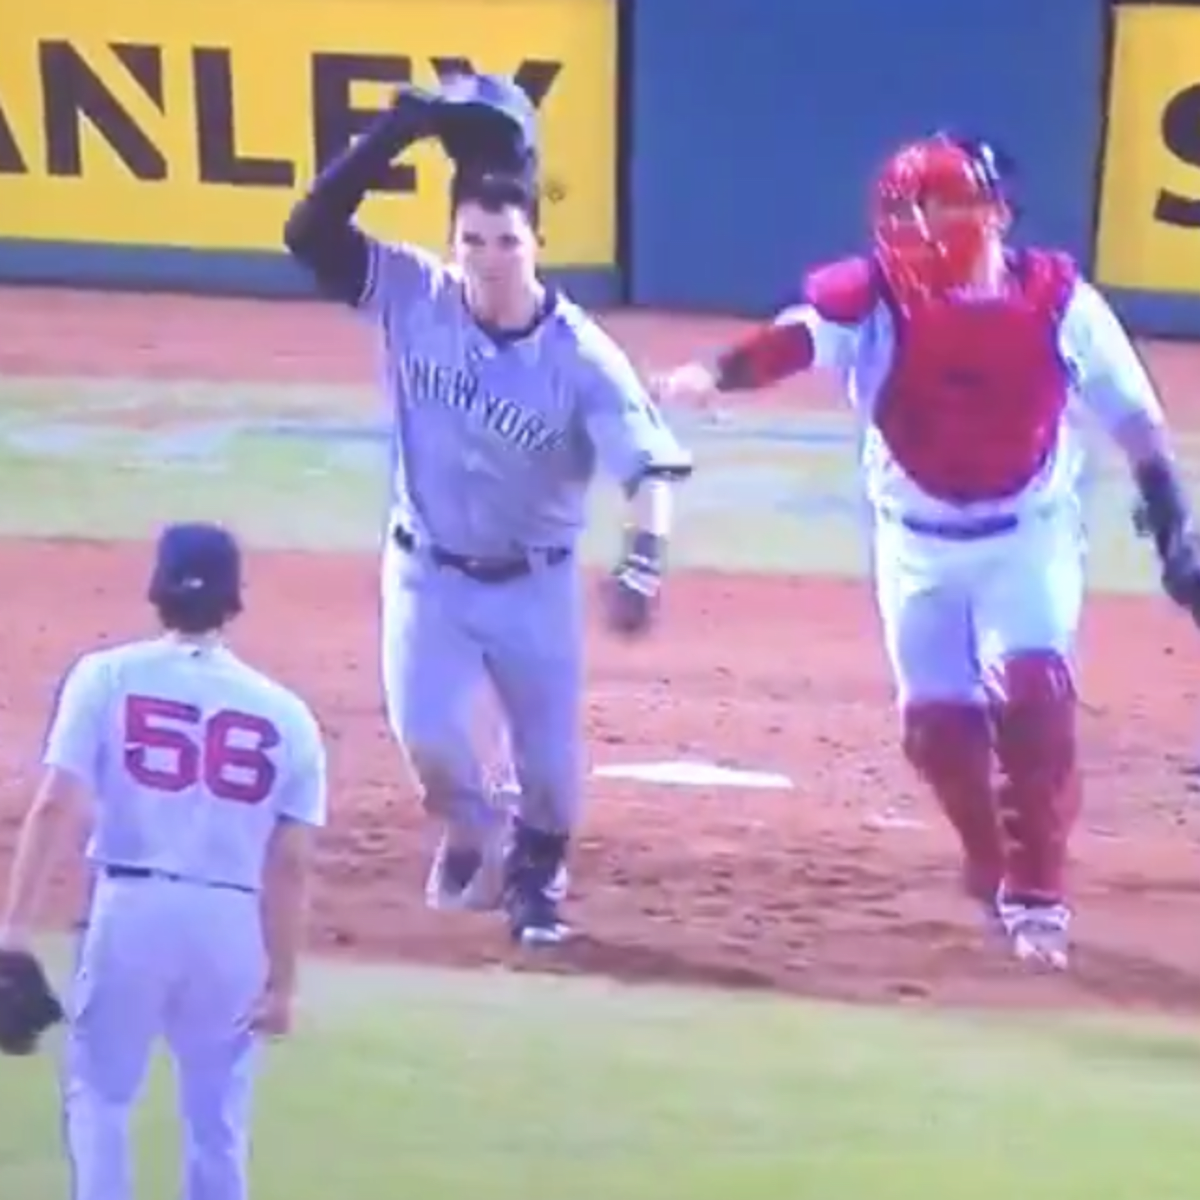 Yankees-Red Sox brawl for real after Tyler Austin gets plunked